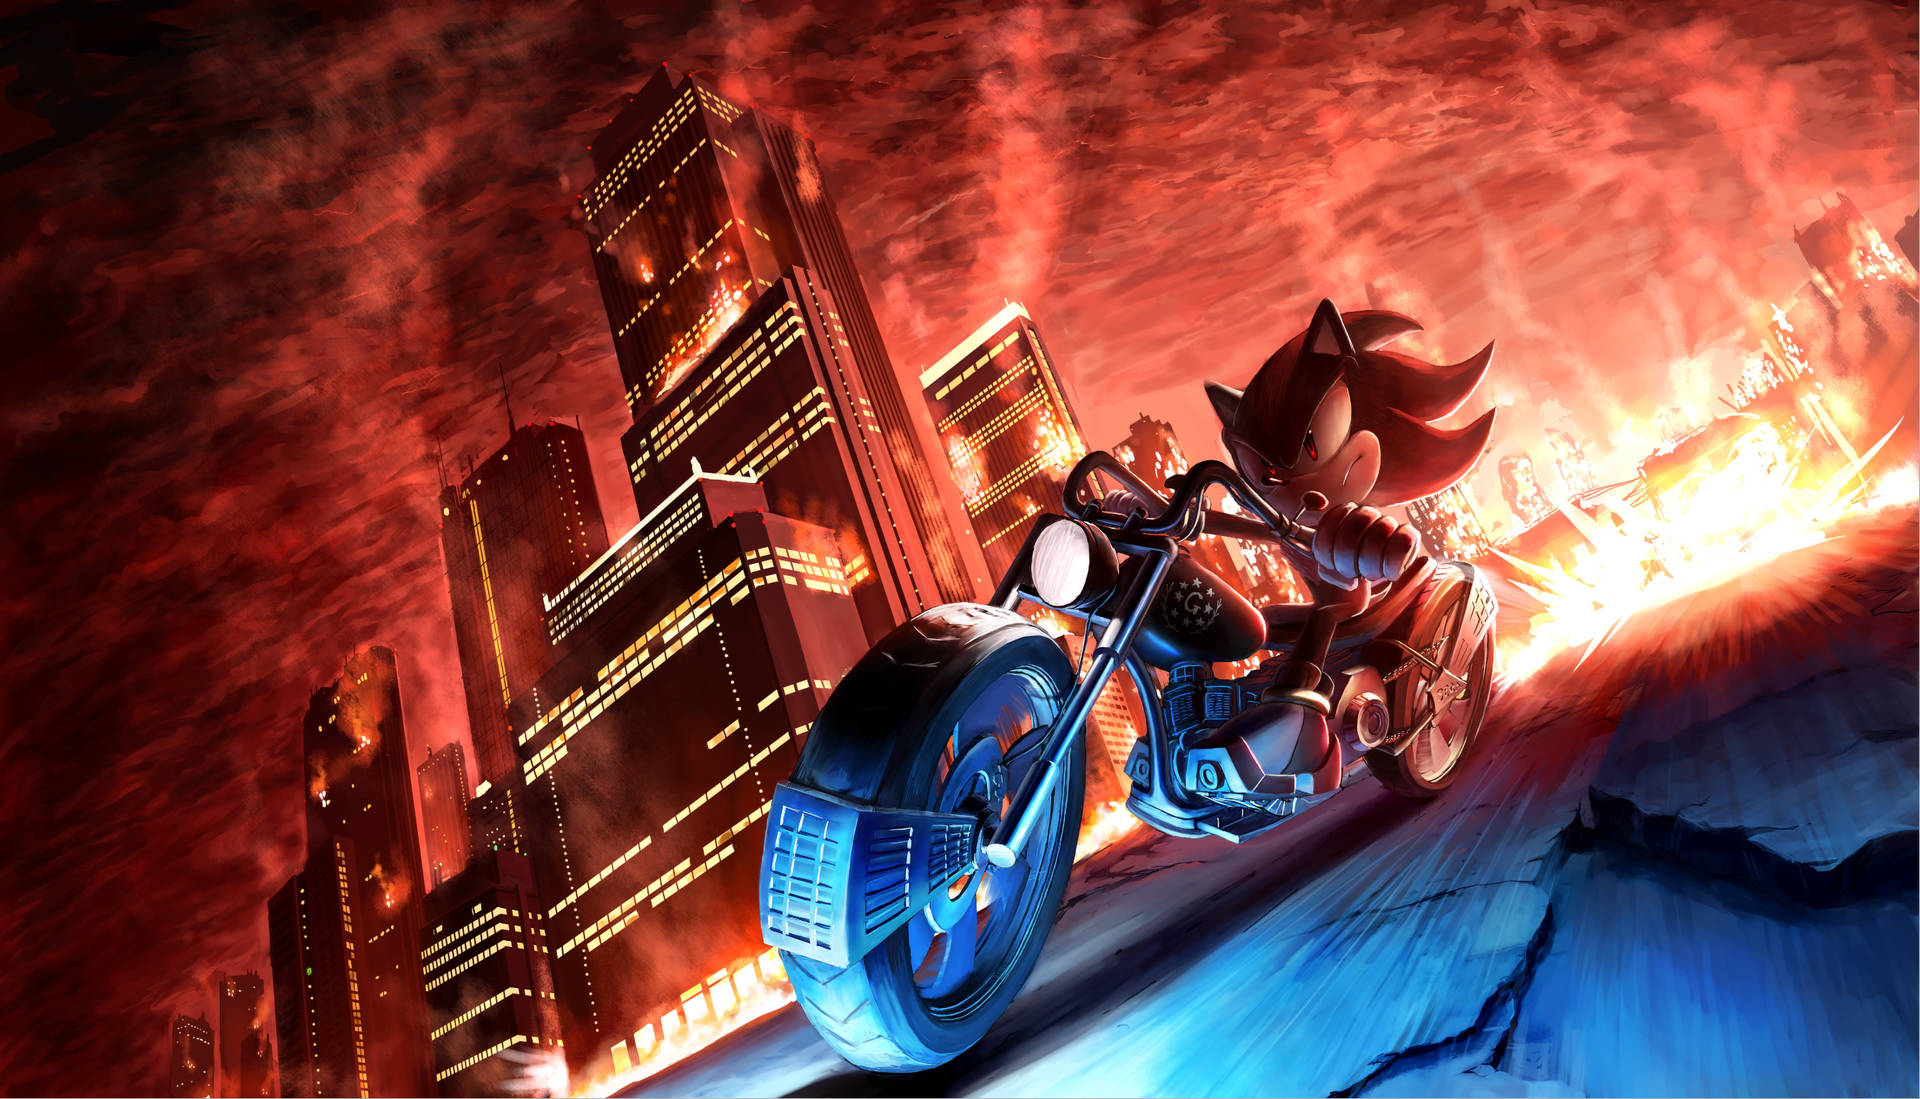 Evil Sonic The Hedgehog Riding A Motorcycle Background